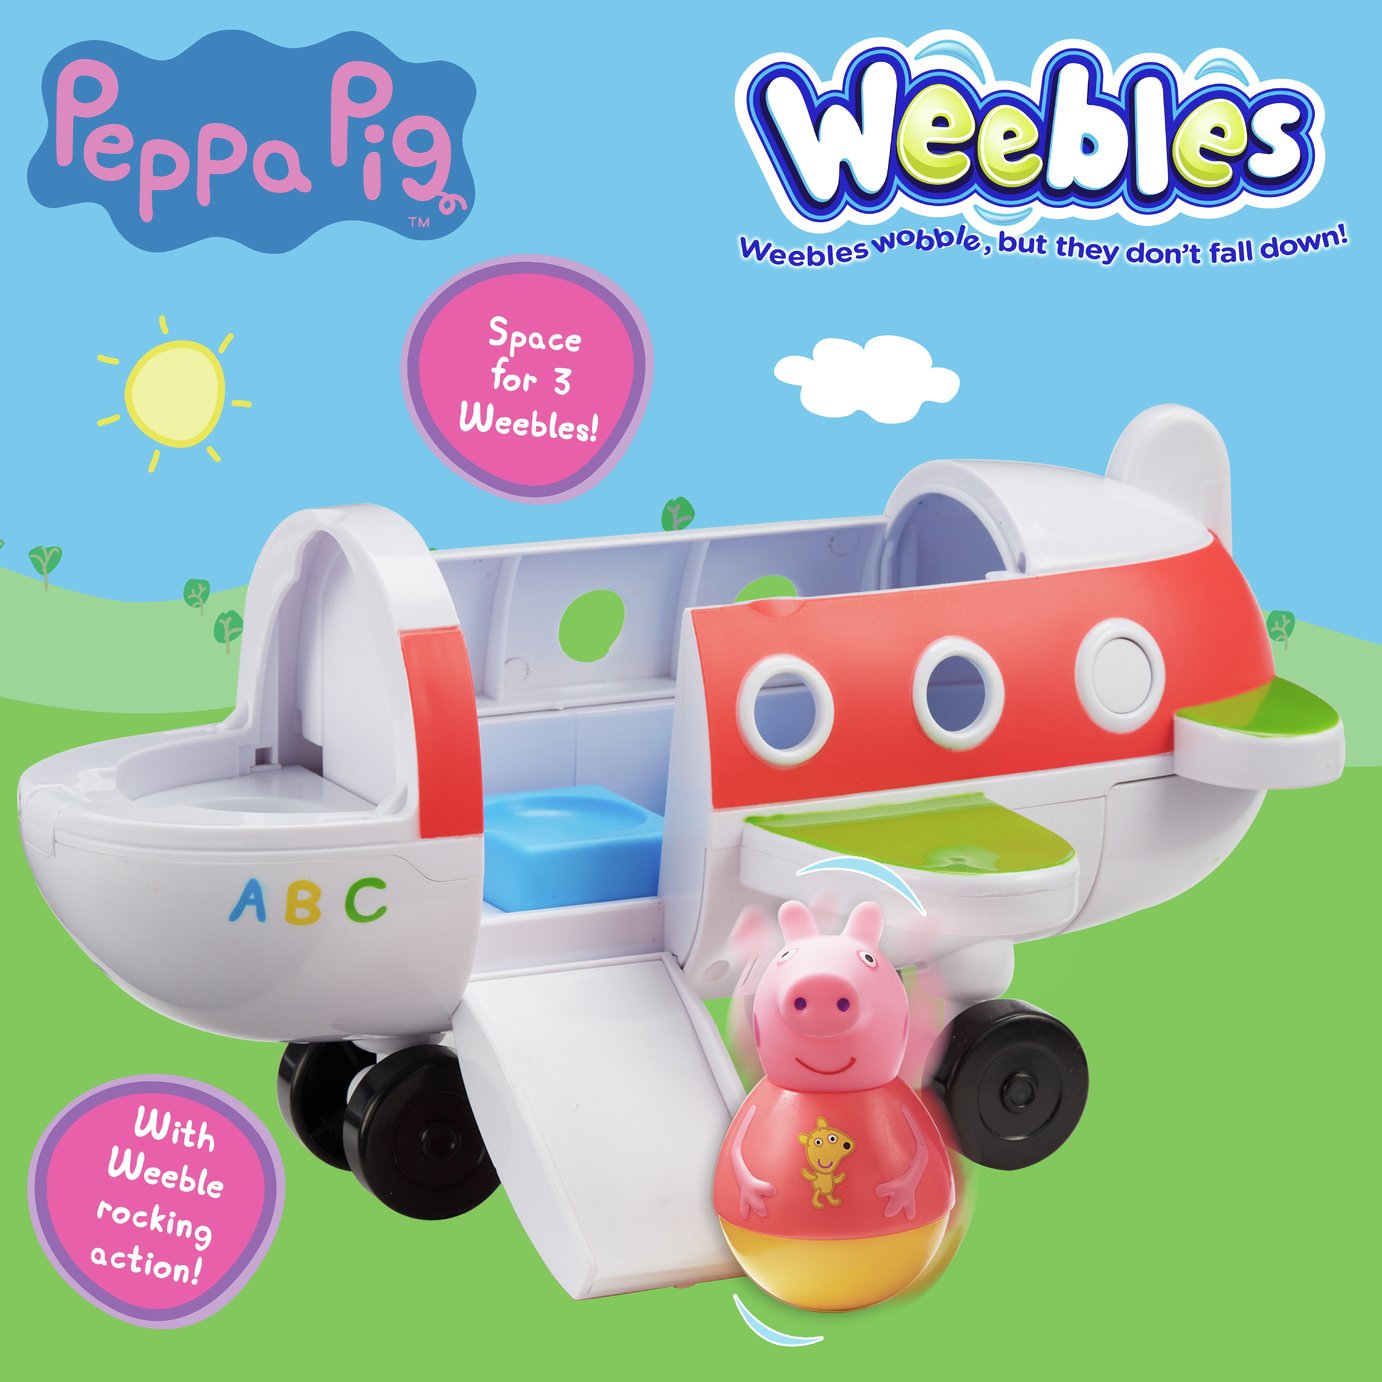 Weebles Peppa Pig Push Along Wobbly Plane review